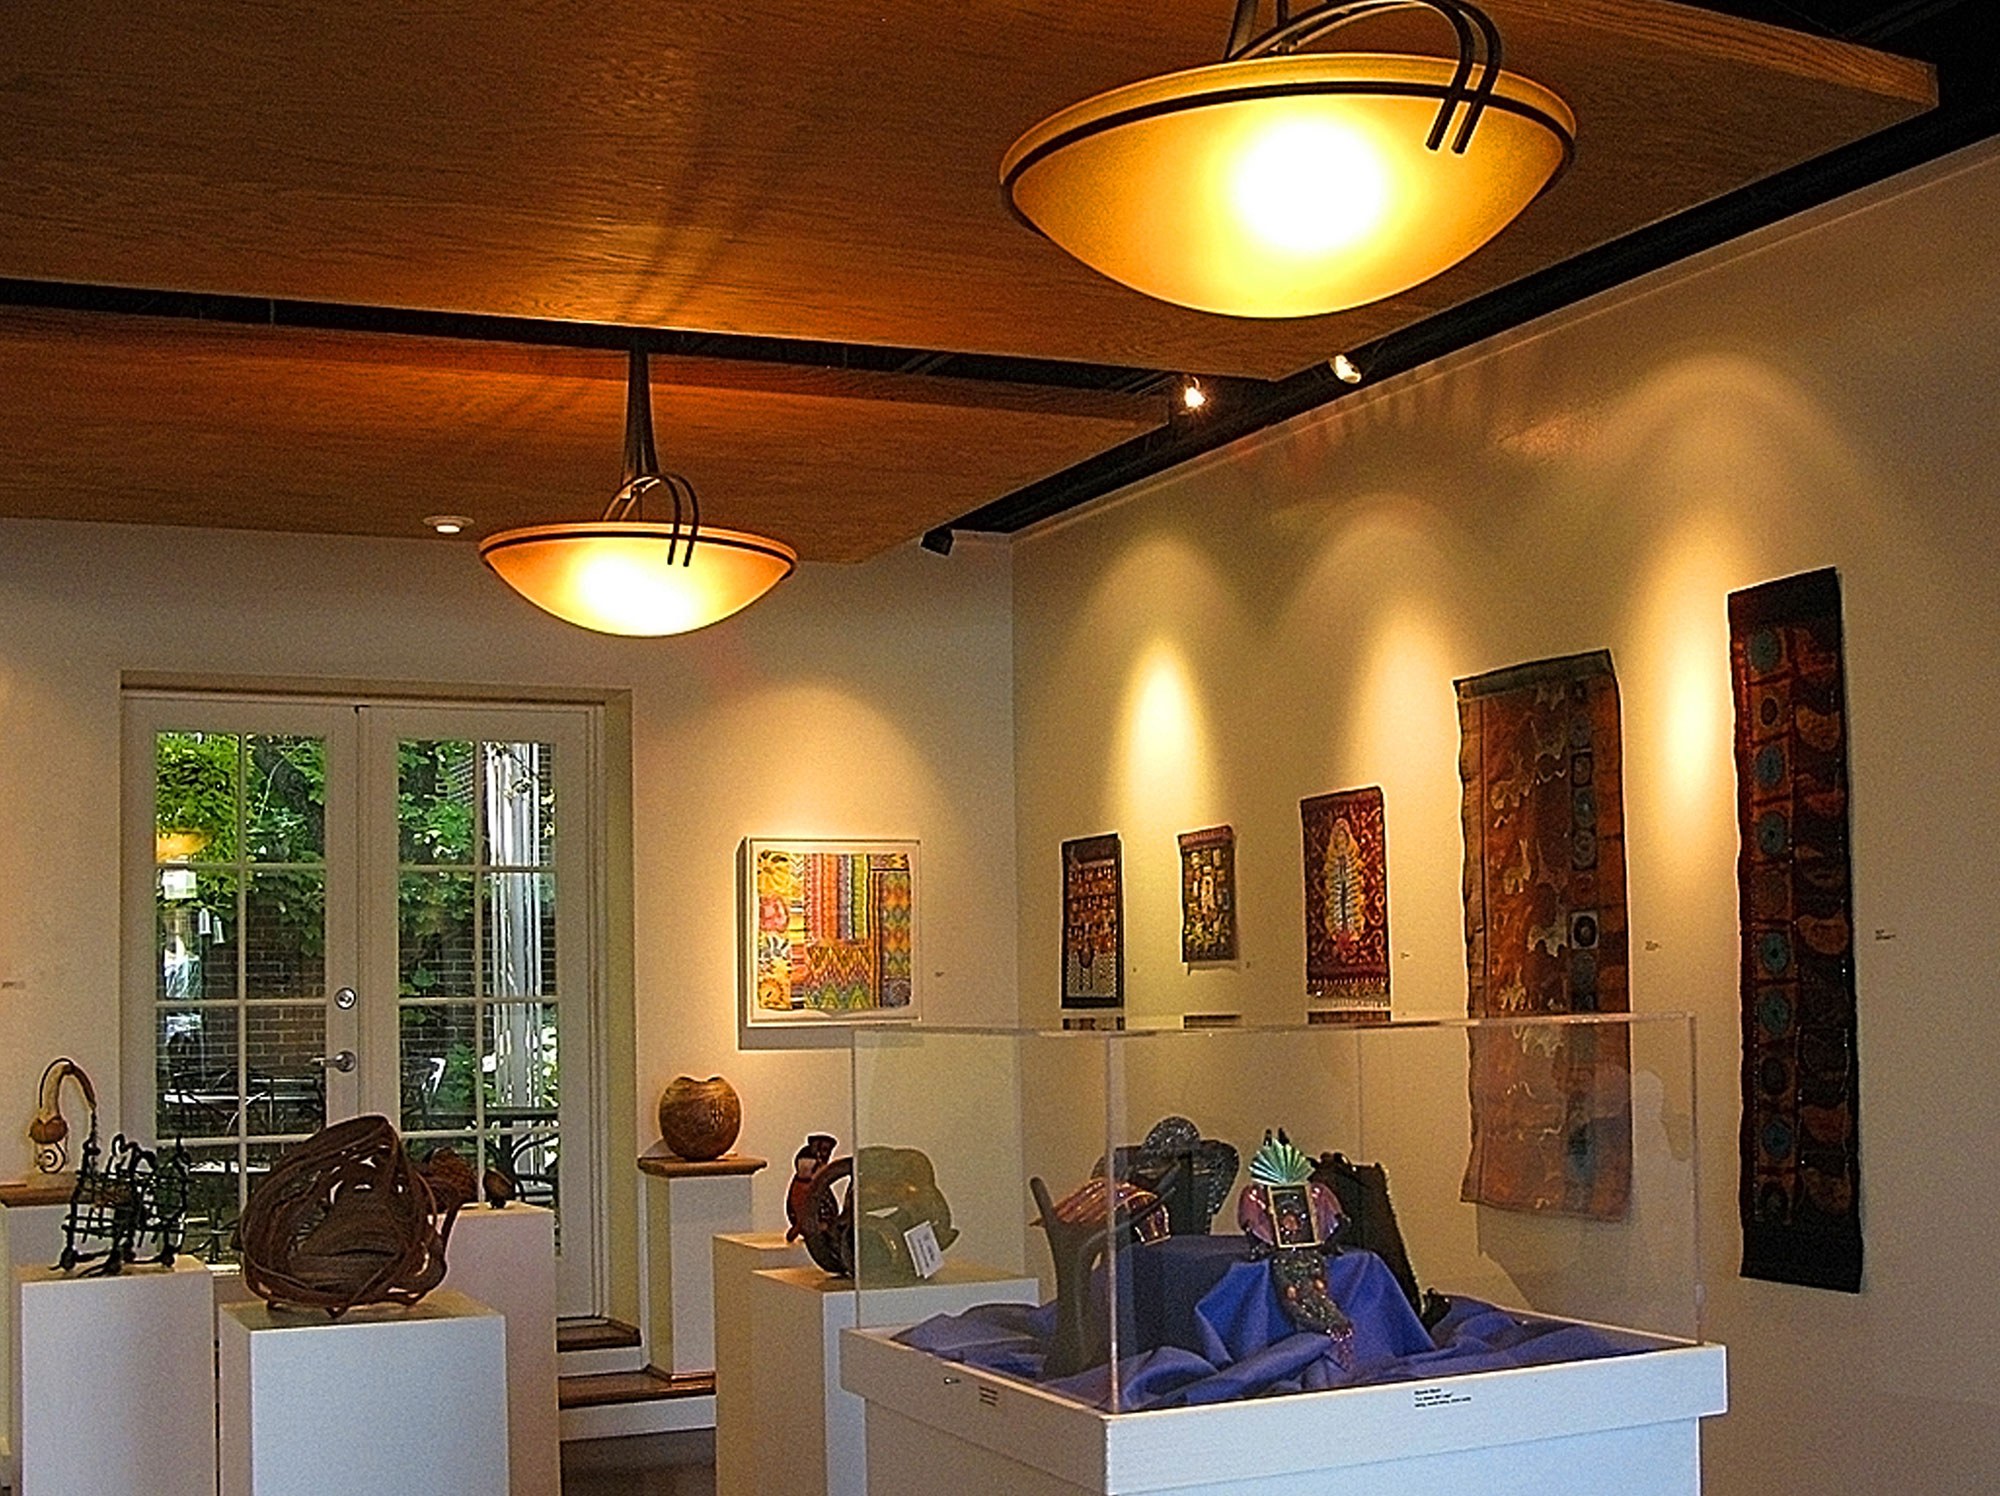 The Old Orchard Gallery